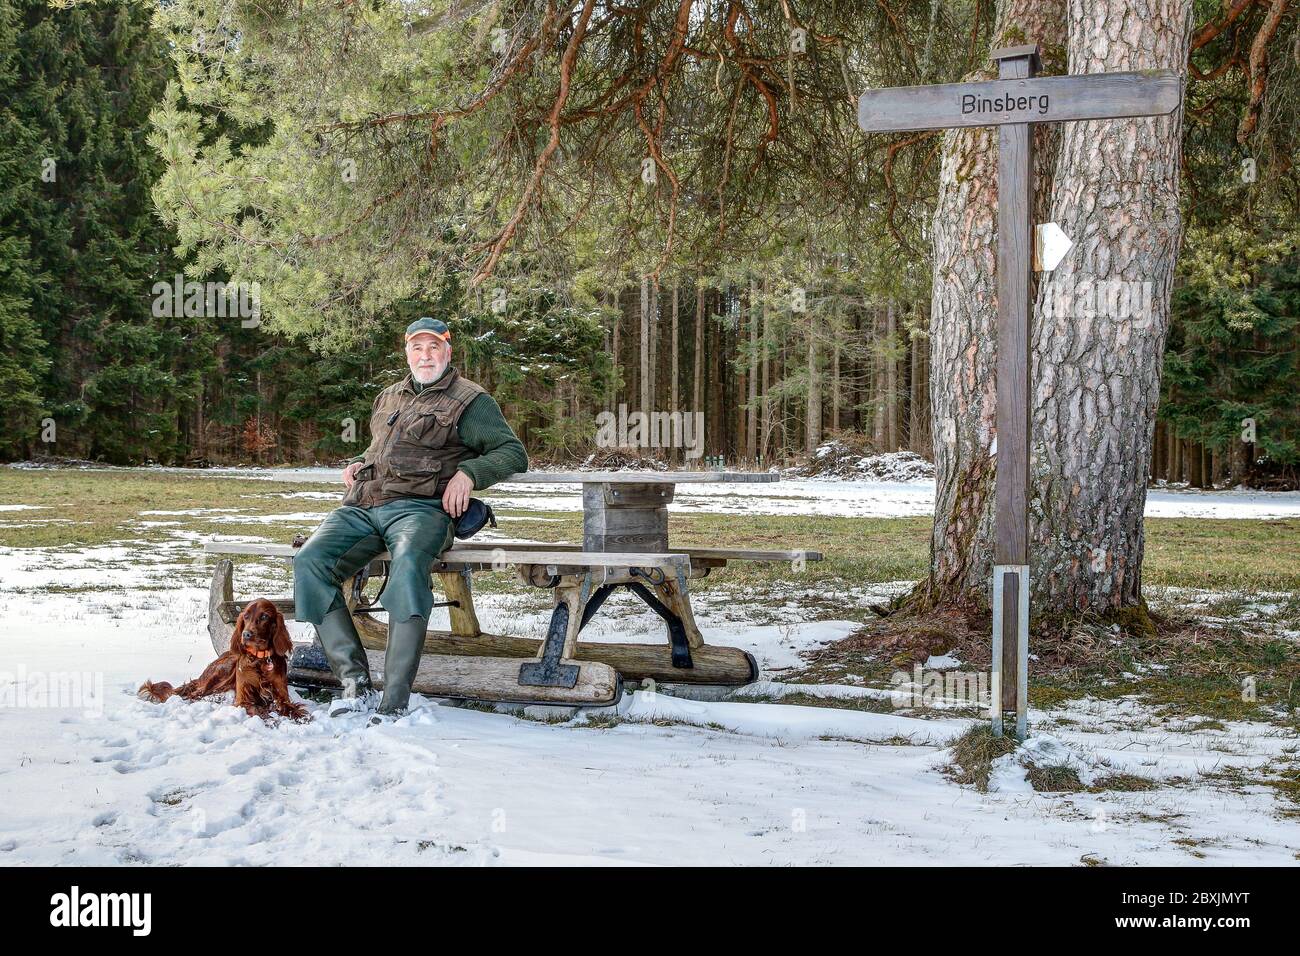 A hiker and his dog take a break at the Binsberg resting place, a popular excursion and hiking destination on the Swabian Alb in Germany. Stock Photo